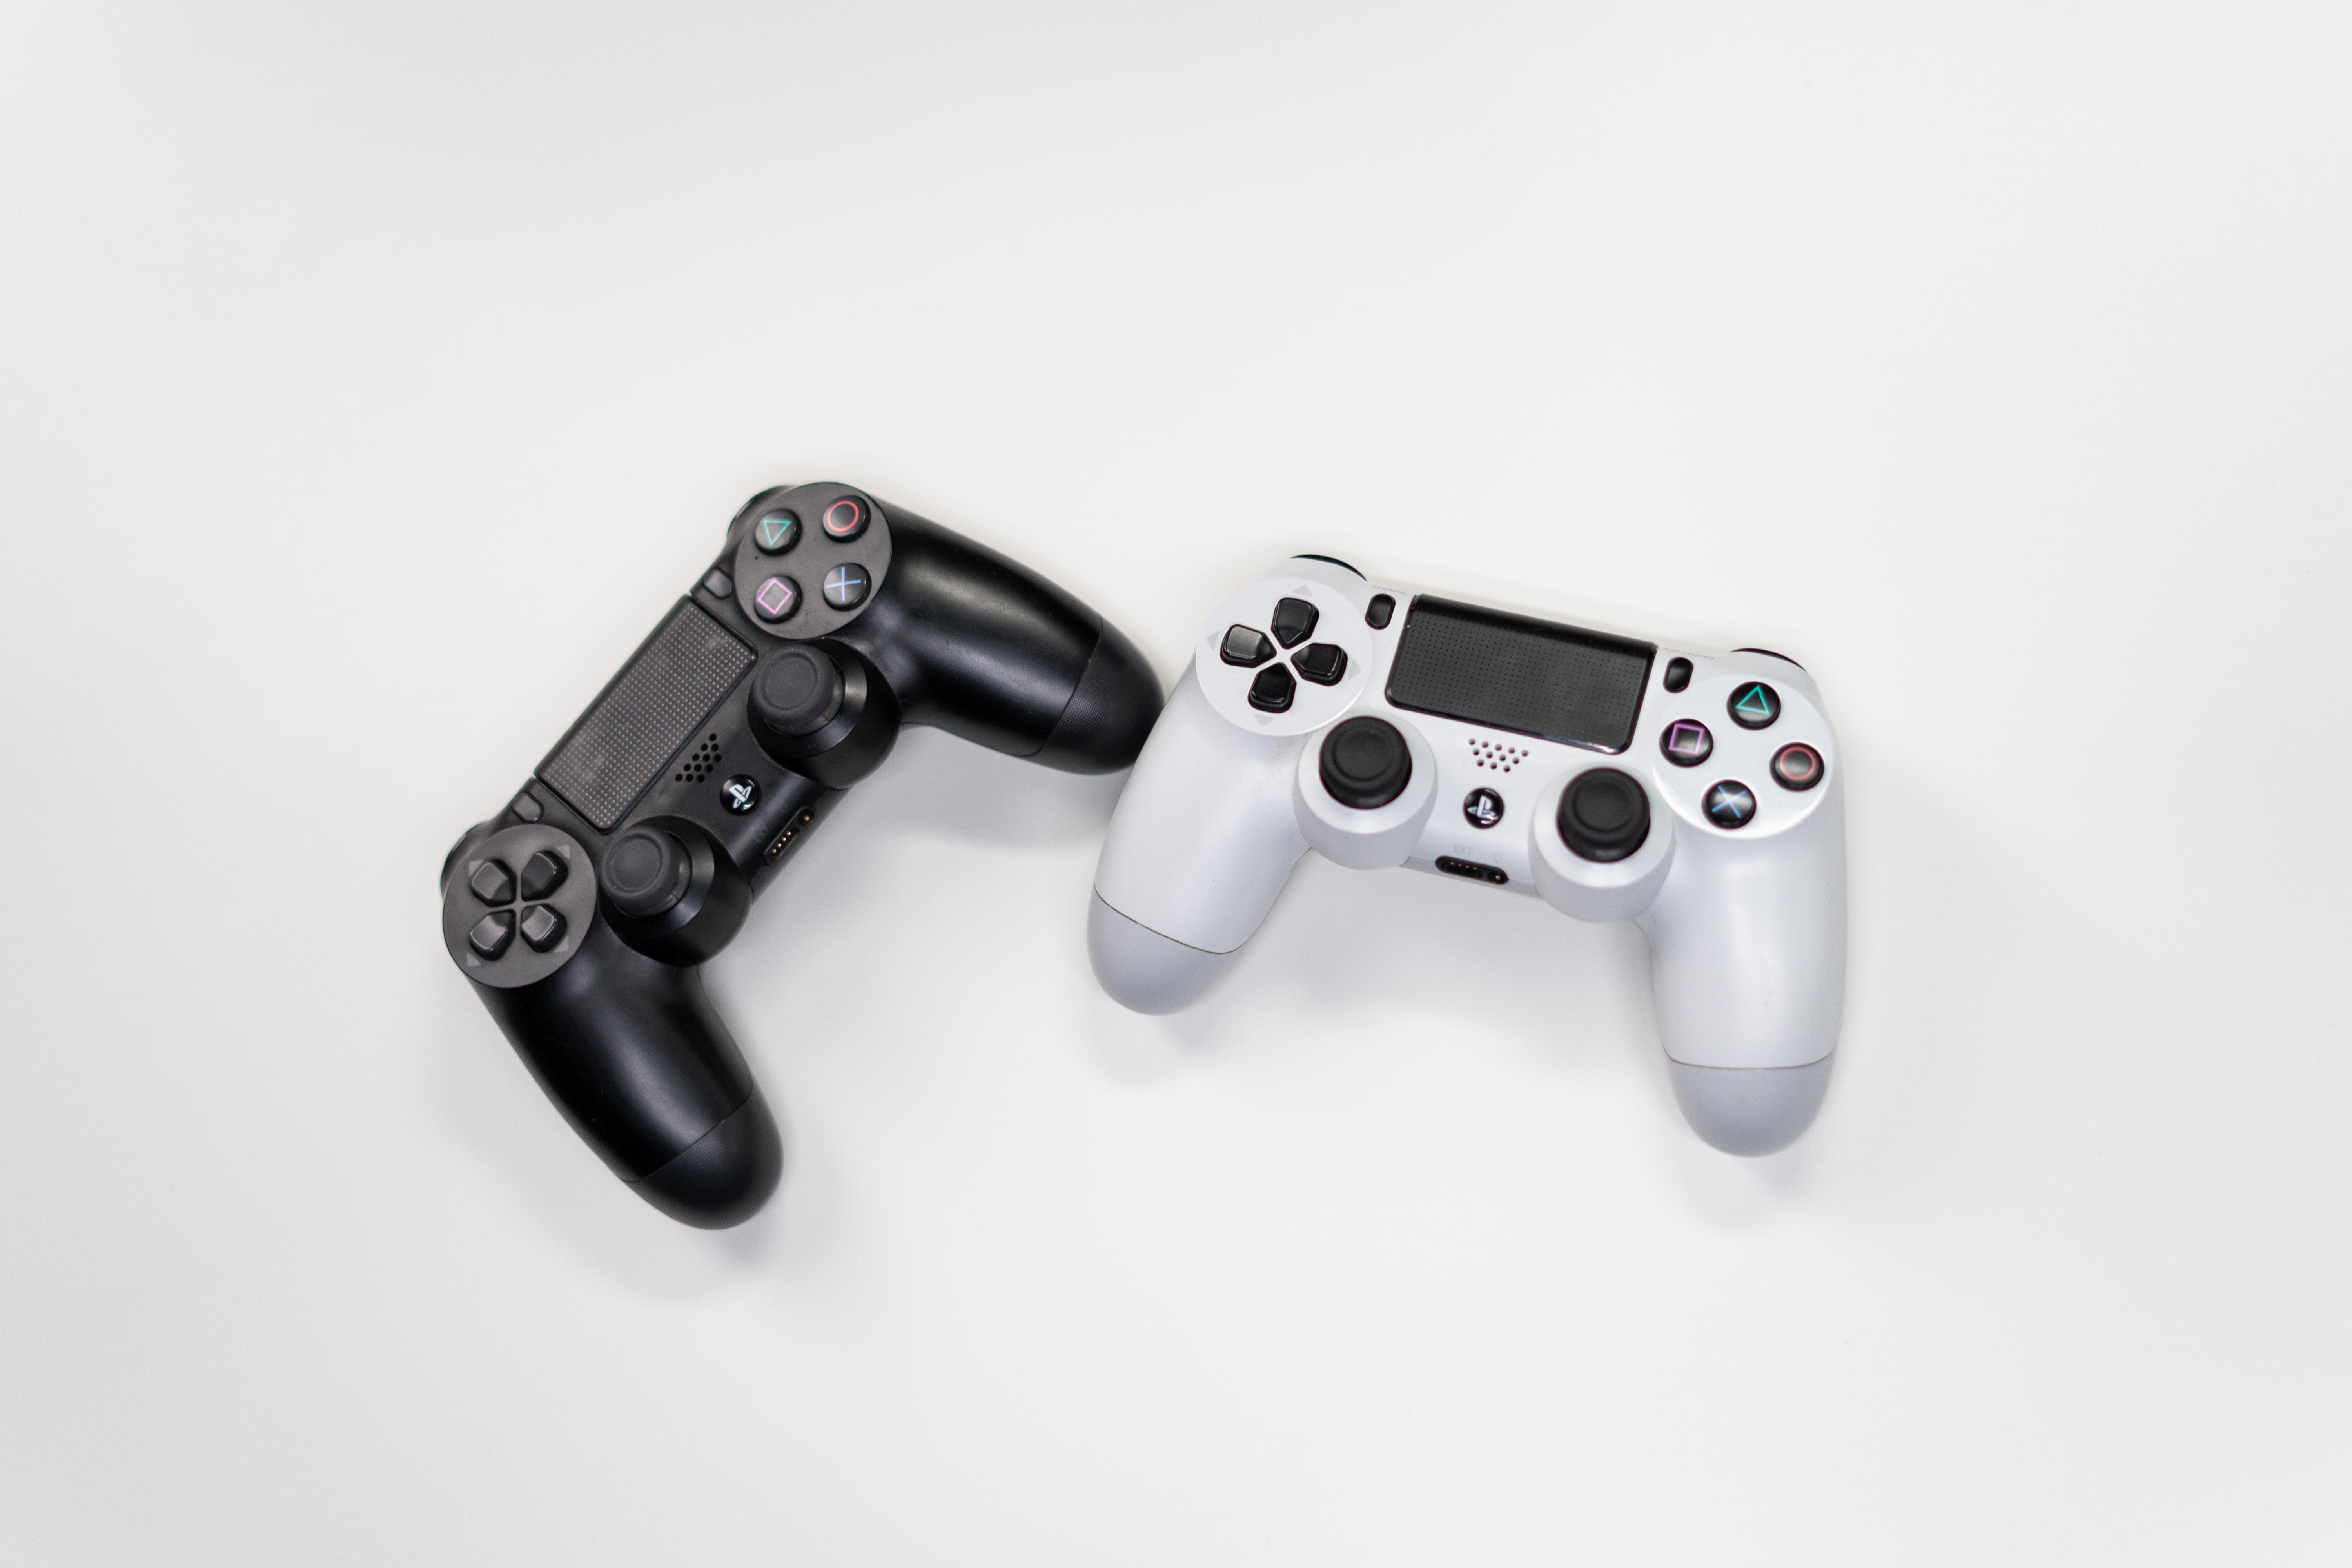 Is DualShock 4 discontinued?